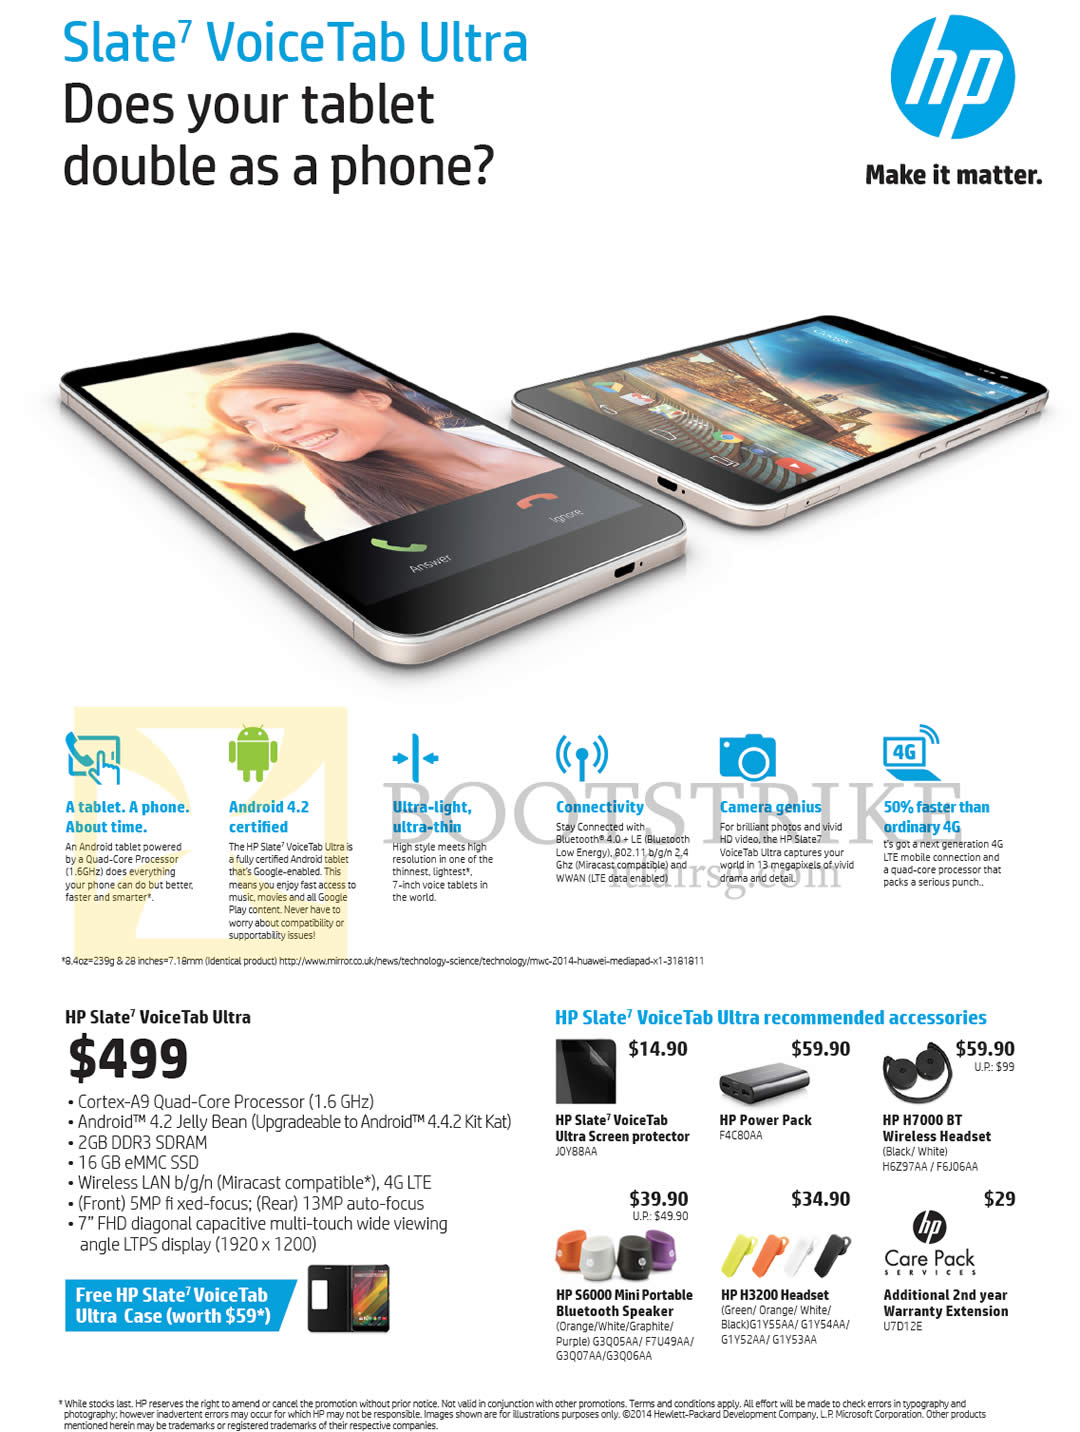 COMEX 2014 price list image brochure of HP Tablet Slate 7 Voice Tab Ultra, Screen Protector, PowerPack, Wireless Headset, Bluetooth Speaker, Headset, Warranty Extension